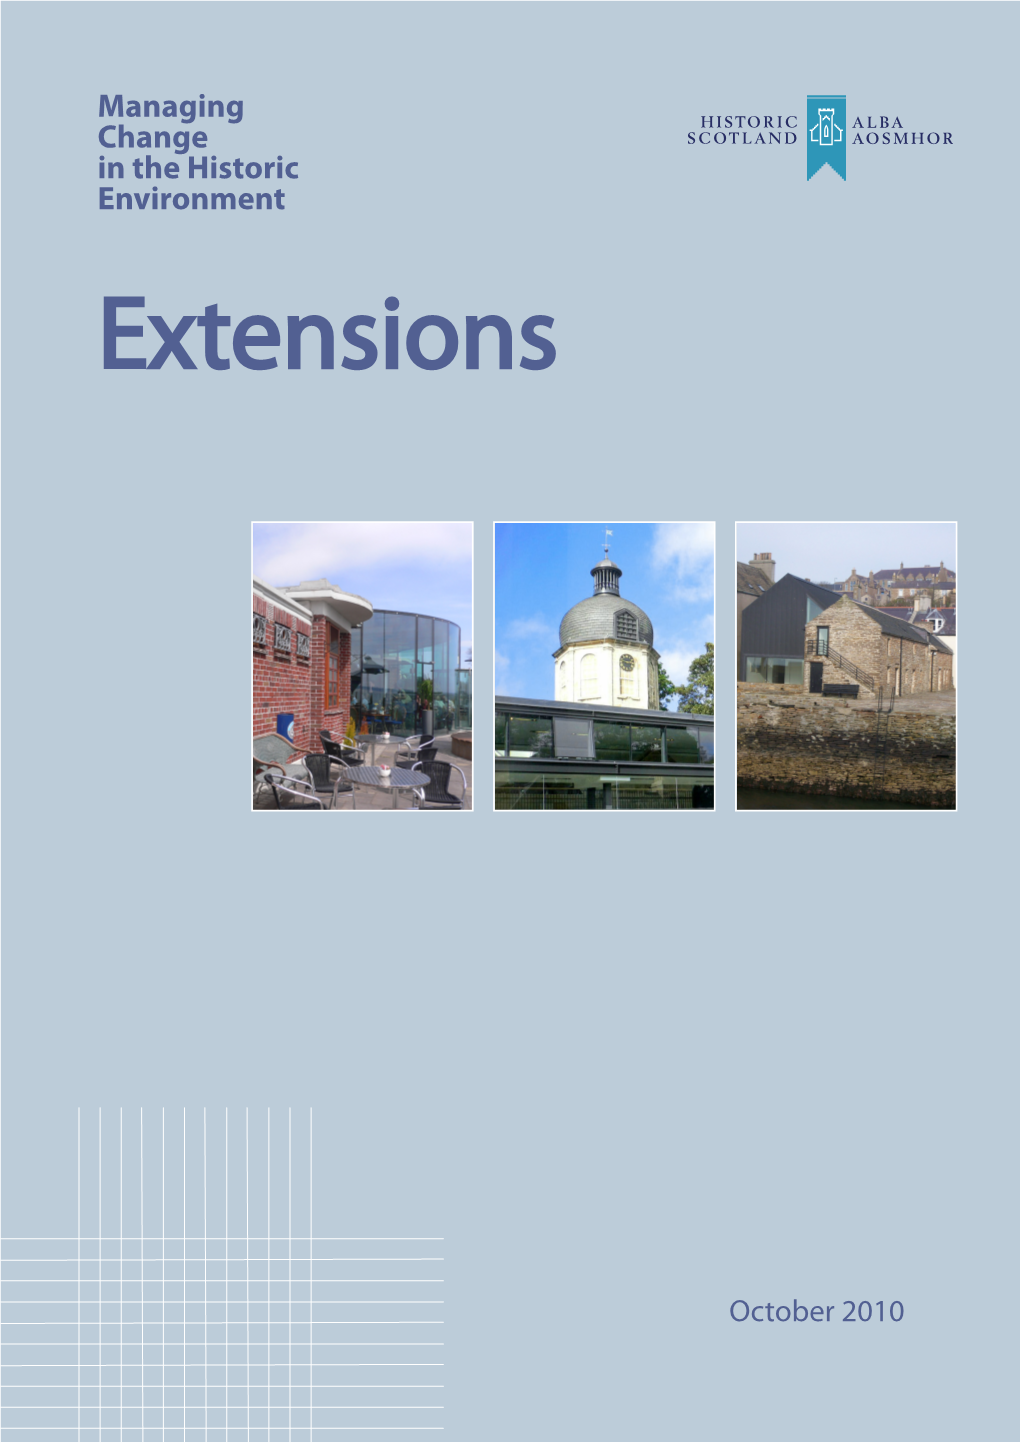 Managing Change in the Historic Environment: Extensions